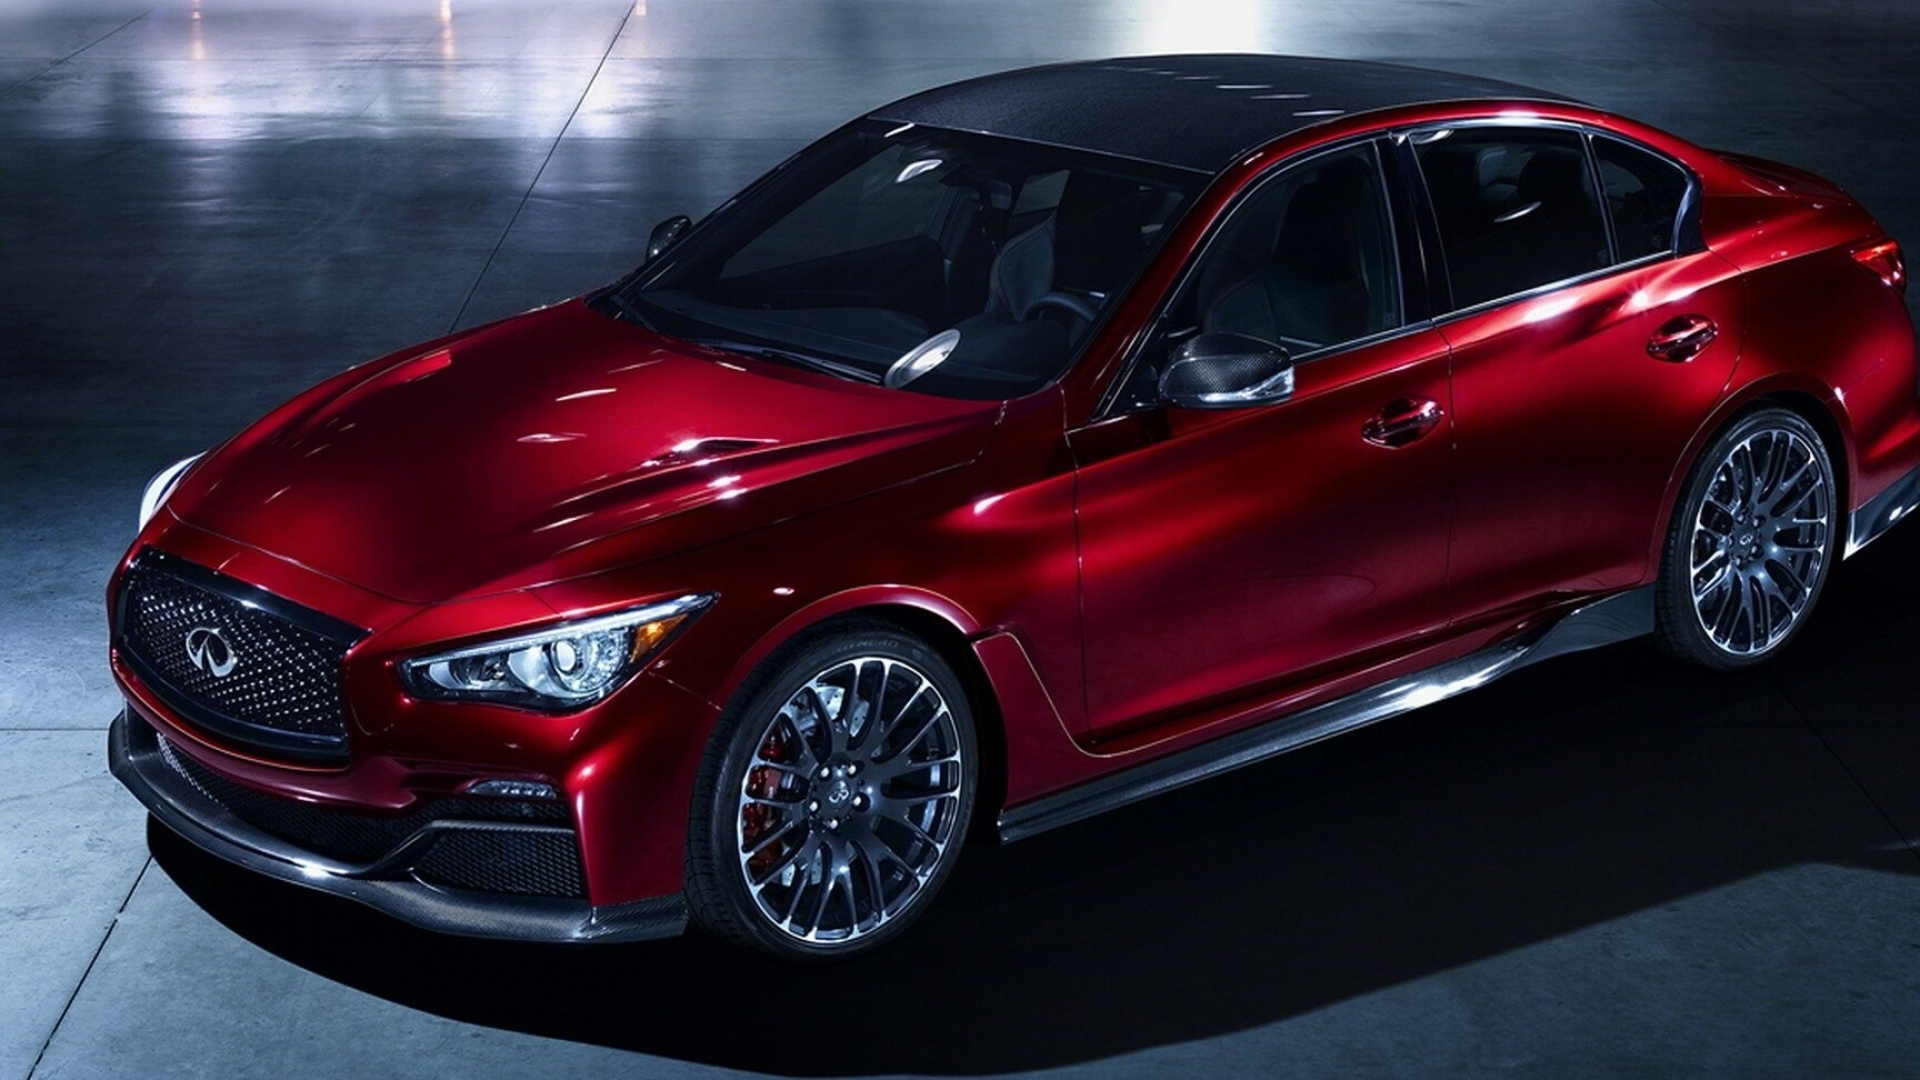 Infiniti: A compact luxury car, Changes from the Q50 Eau Rouge concept included a twin-turbocharged 3,799 cc V6 from the Nissan GT-R and a 7-speed automatic transmission and Intelligent AWD from the Q70. 1920x1080 Full HD Background.